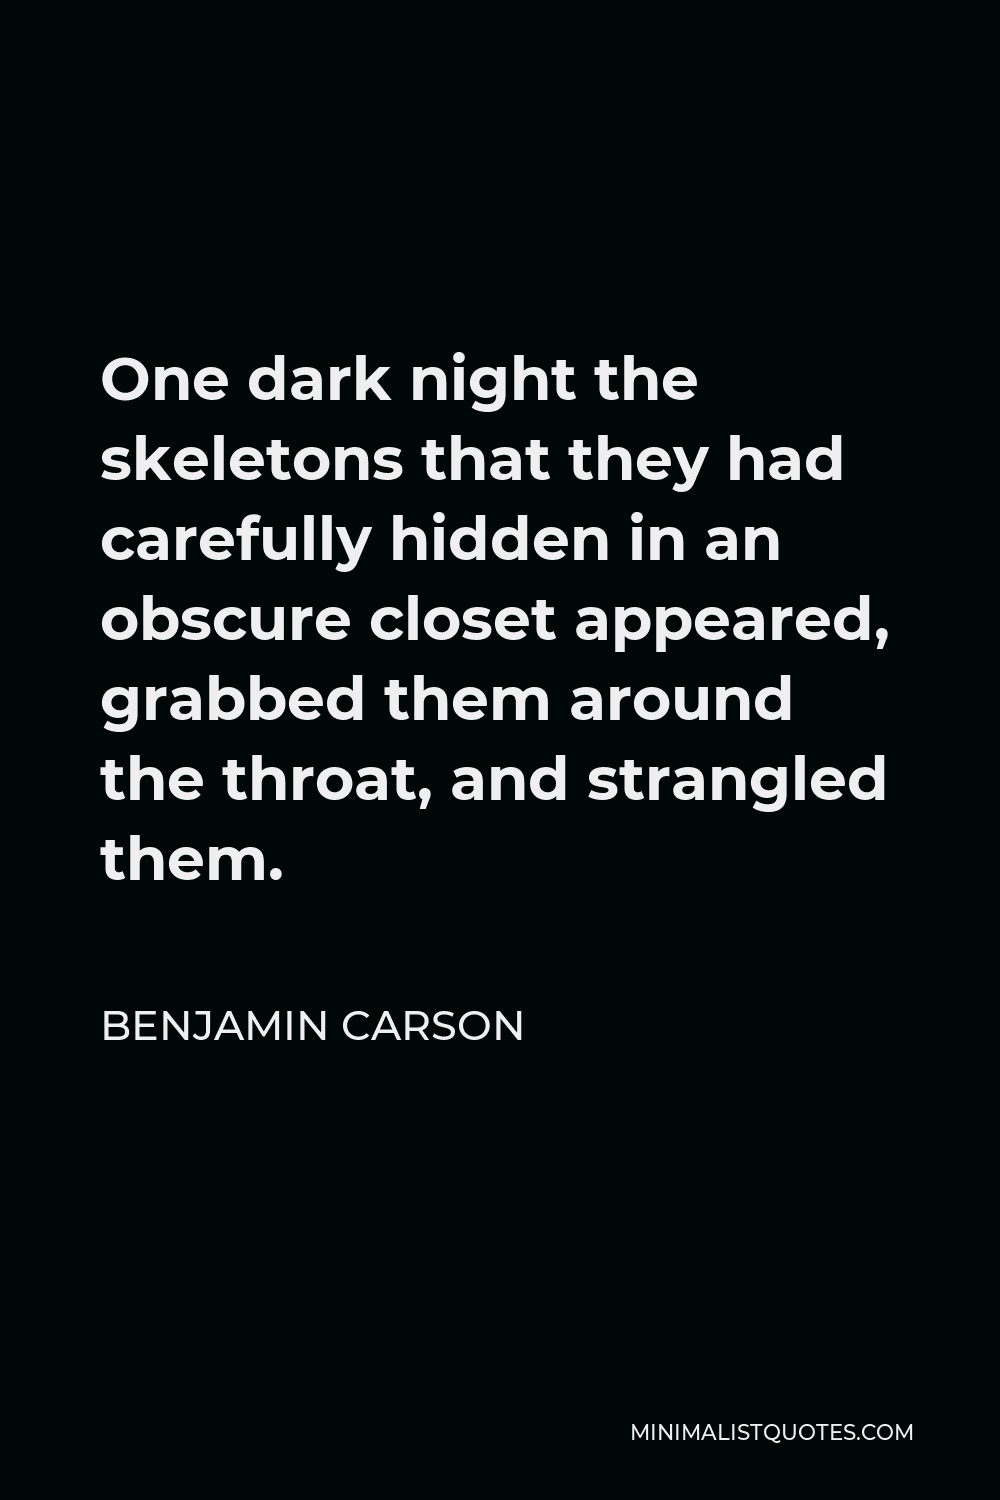 Benjamin Carson Quote - One dark night the skeletons that they had carefully hidden in an obscure closet appeared, grabbed them around the throat, and strangled them.